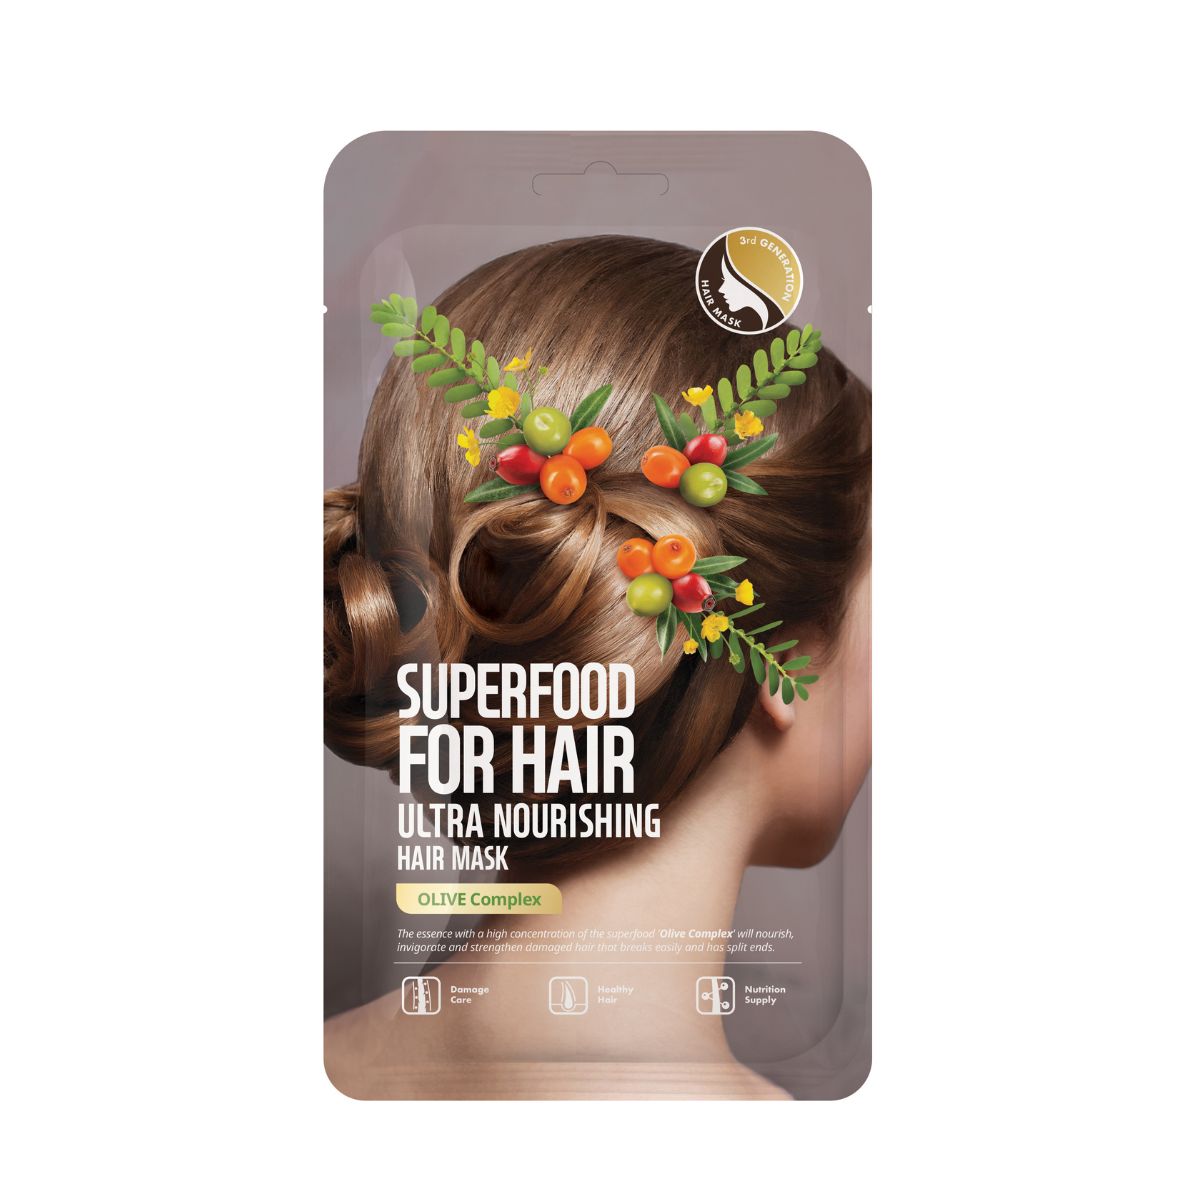 Cabello FARM SKIN SUPERFOOD ULTRA NOURISHING HAIR MASK OLIVE COMPLEX